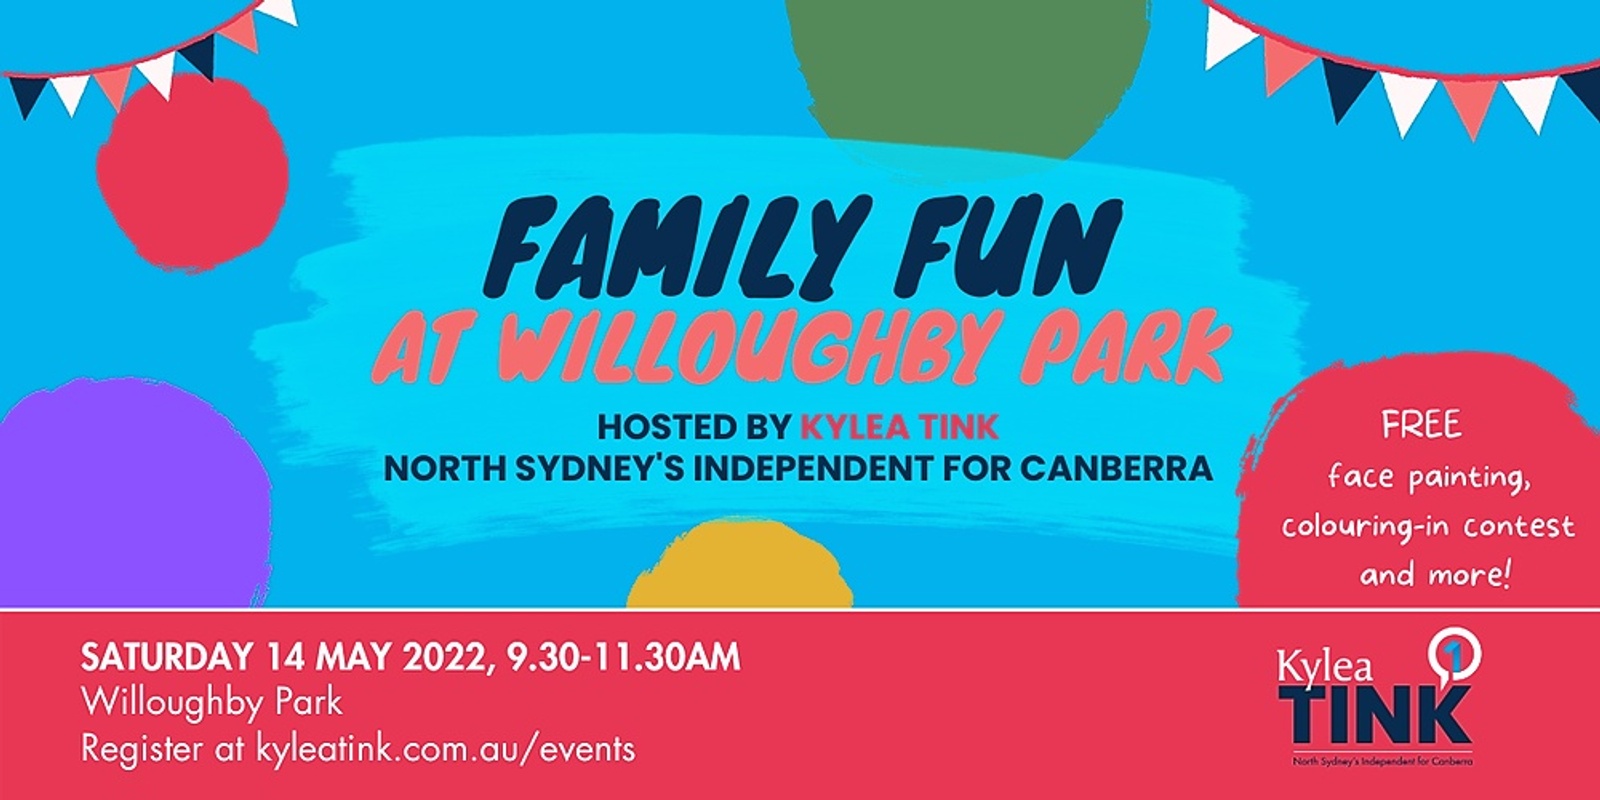 Banner image for Family Fun at Willoughby Park